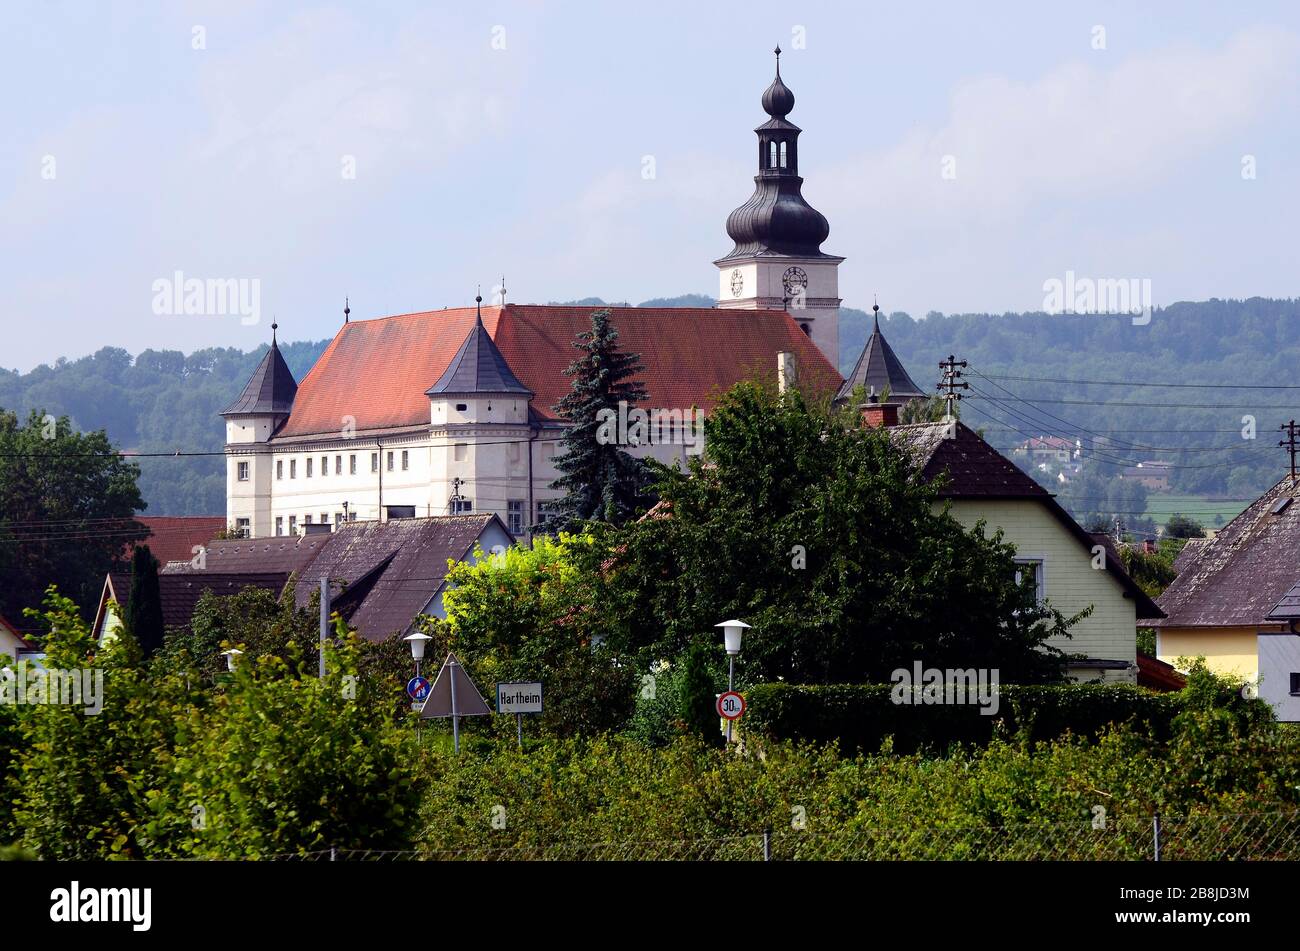 Alkoven, Austria - July 6th 2013: Renaissance castle Hartheim, it became notorious as one of the Nazi Euthanasia killing centers in World War II, it i Stock Photo